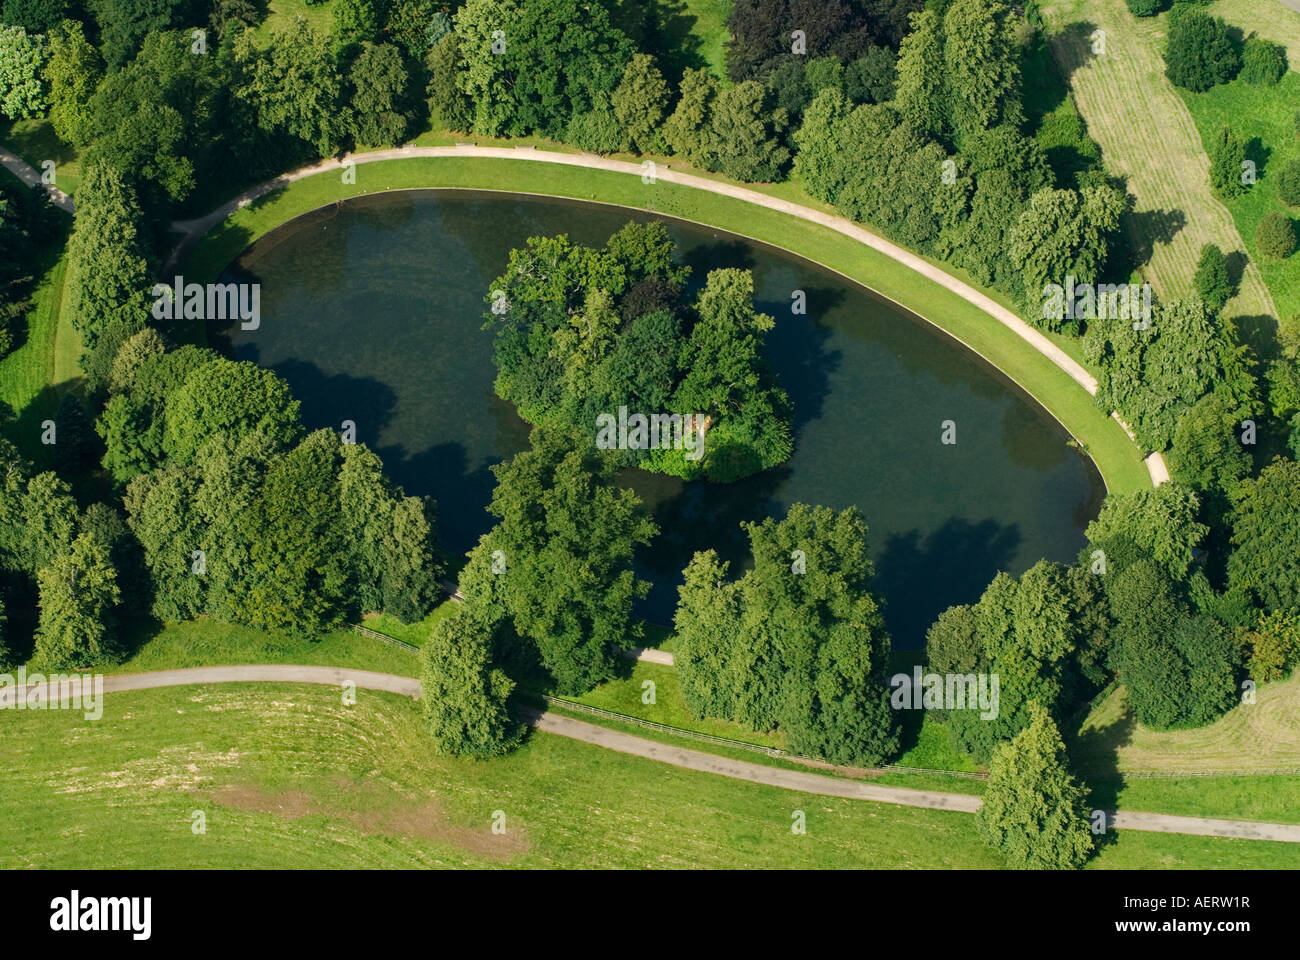 Oval Lake and island where Princess Diana of Wales is buried. Her Last Resting Place Althorp House Northamptonshire England 1997 HOMER SYKES Stock Photo